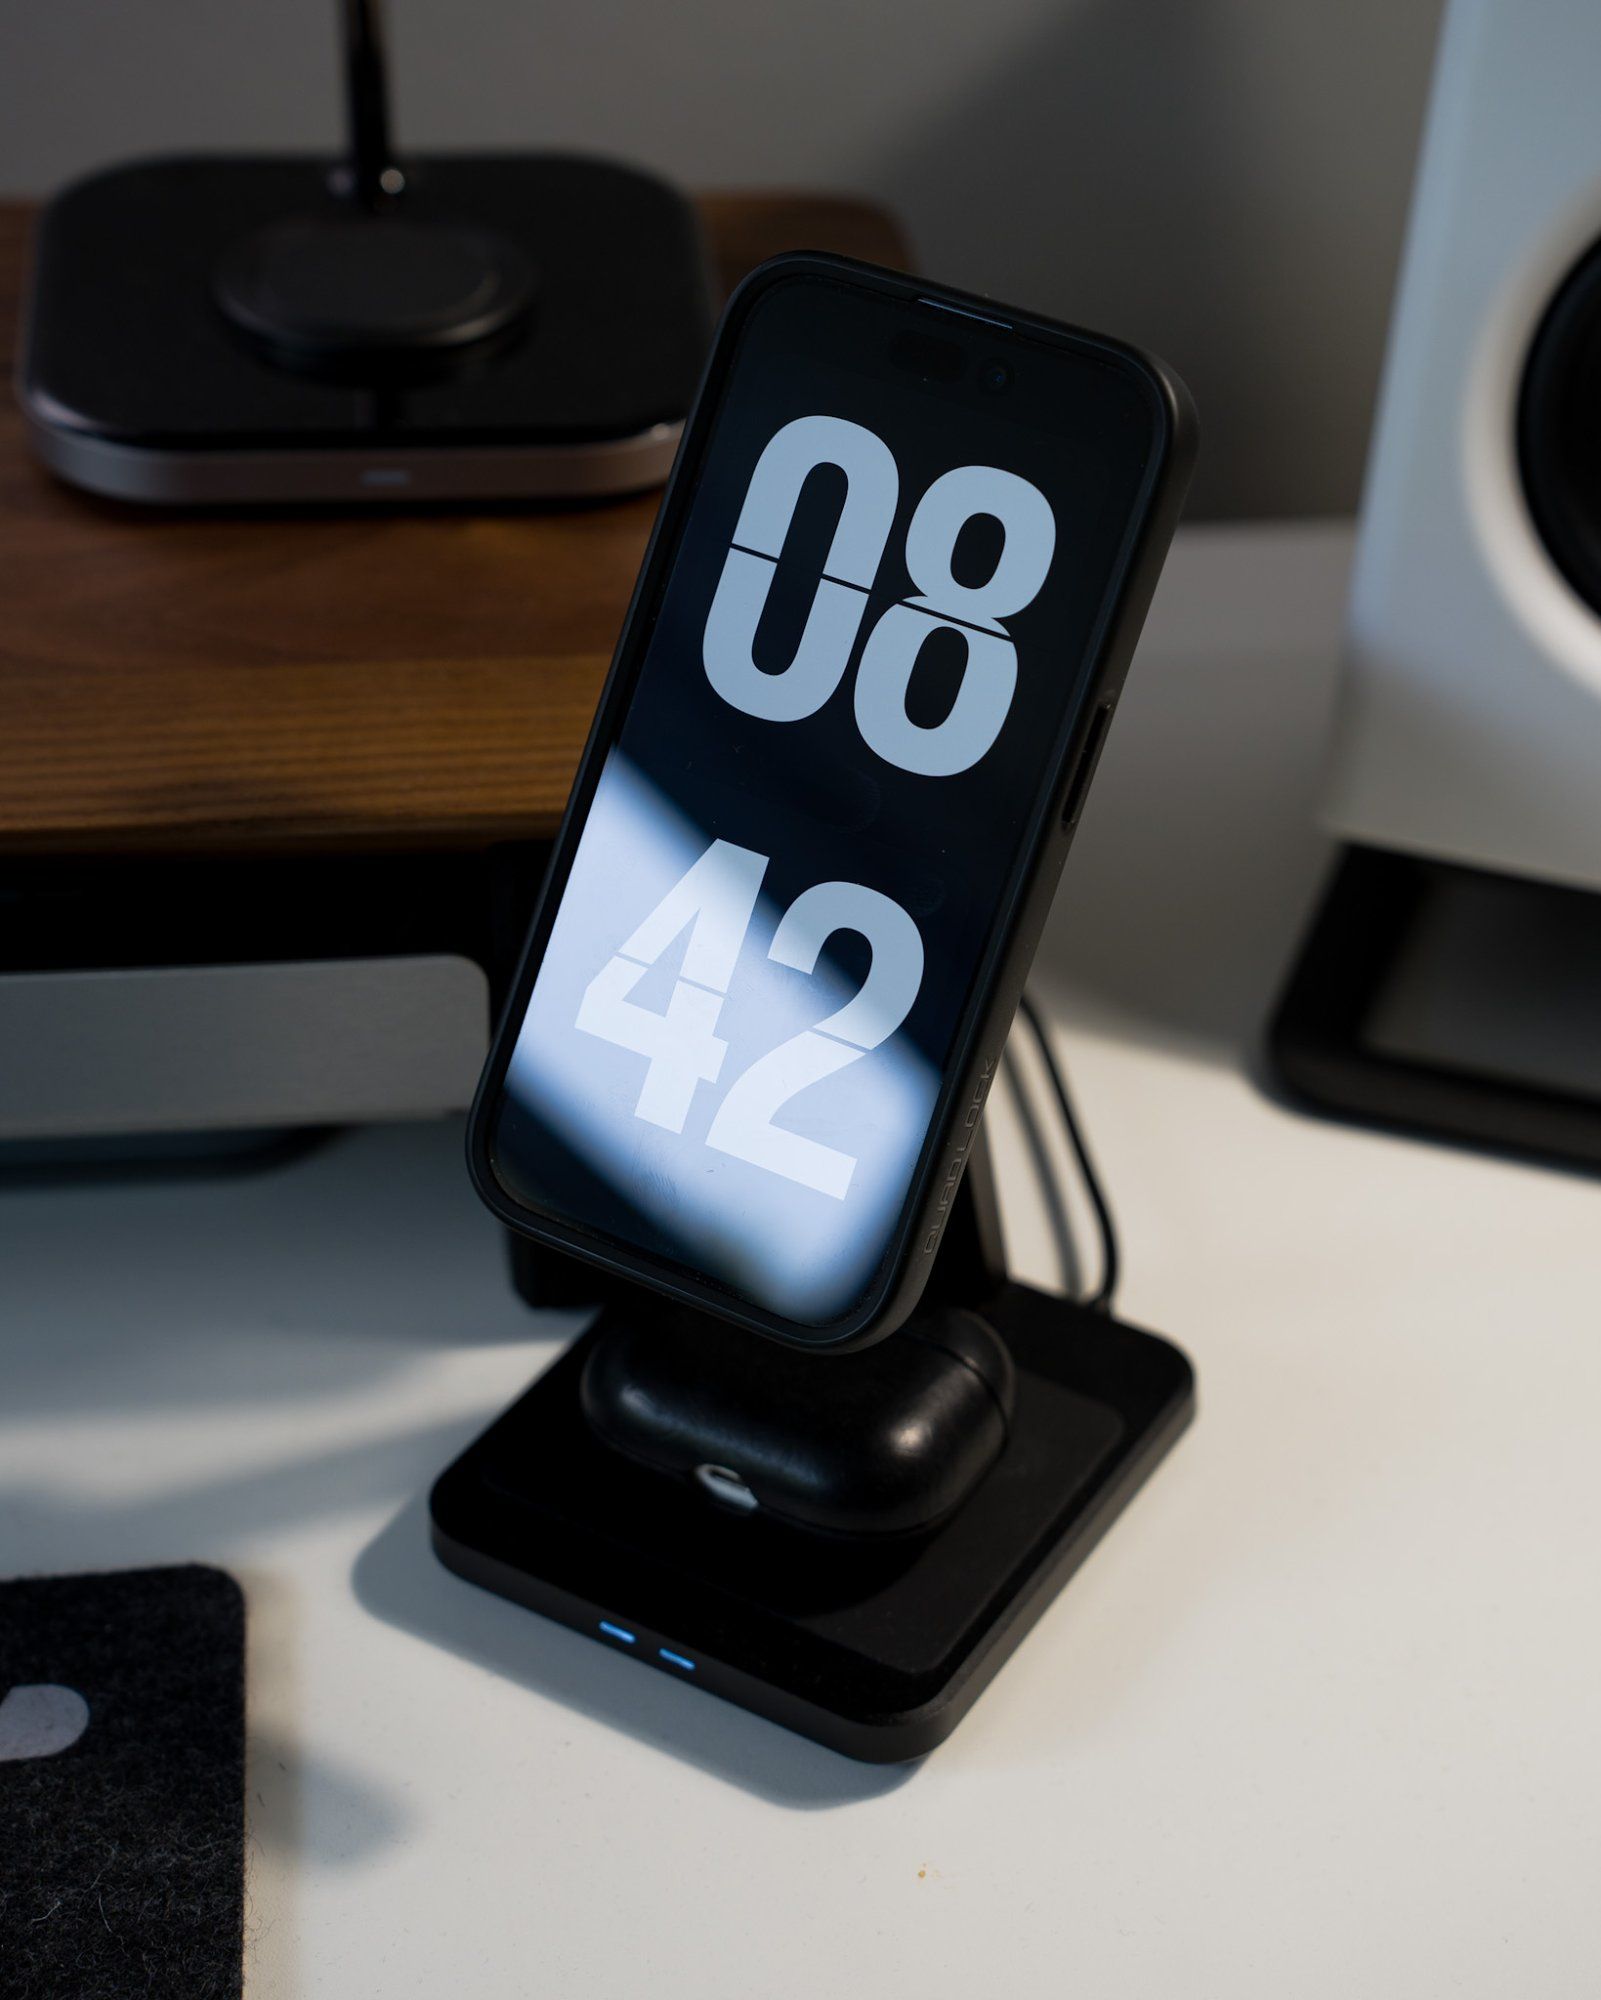 An iPhone and AirPods on a QuadLock MAG dual desktop wireless charger